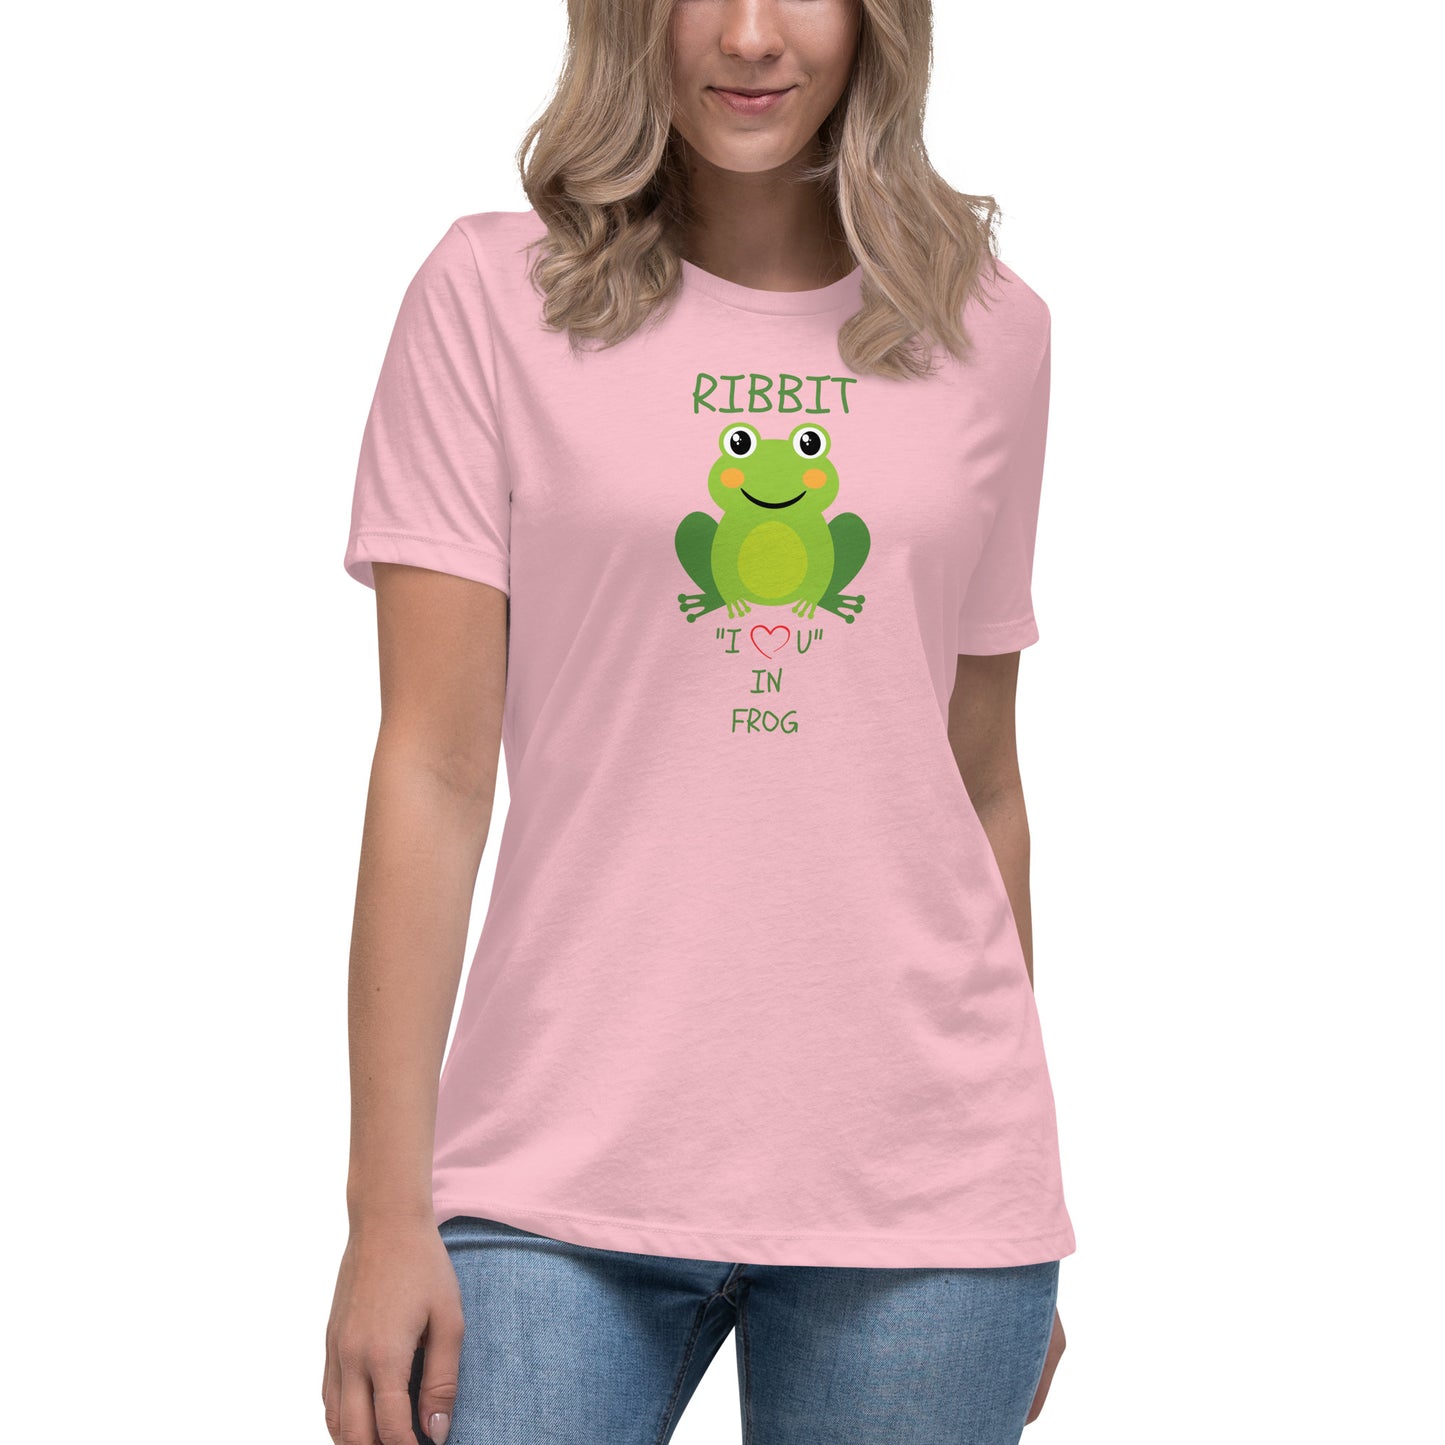 RIBBIT "I LOVE U" IN FROG Women's Relaxed T-Shirt